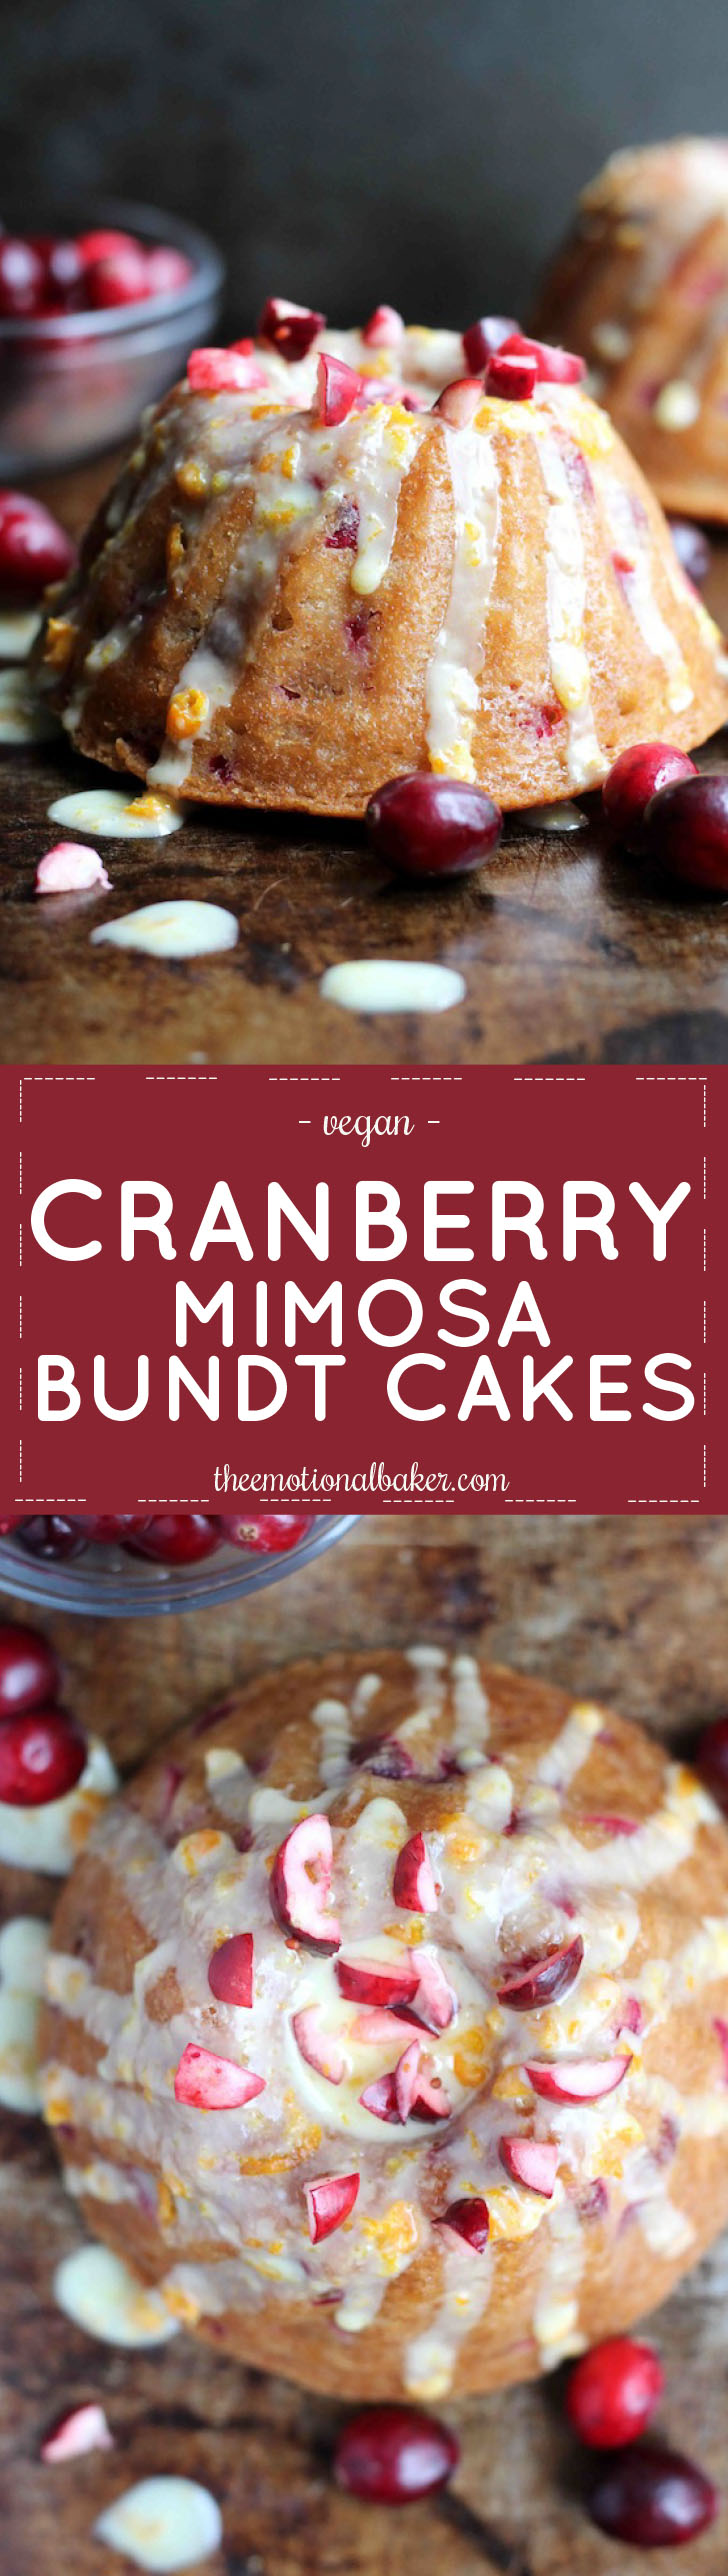 Celebrate the new year with a Cranberry Mimosa Bundt Cake. These mini cakes are spiked with your choice of bubbly - ginger ale, champagne, etc, are loaded with fresh cranberries, and are topped with a simple orange glaze.